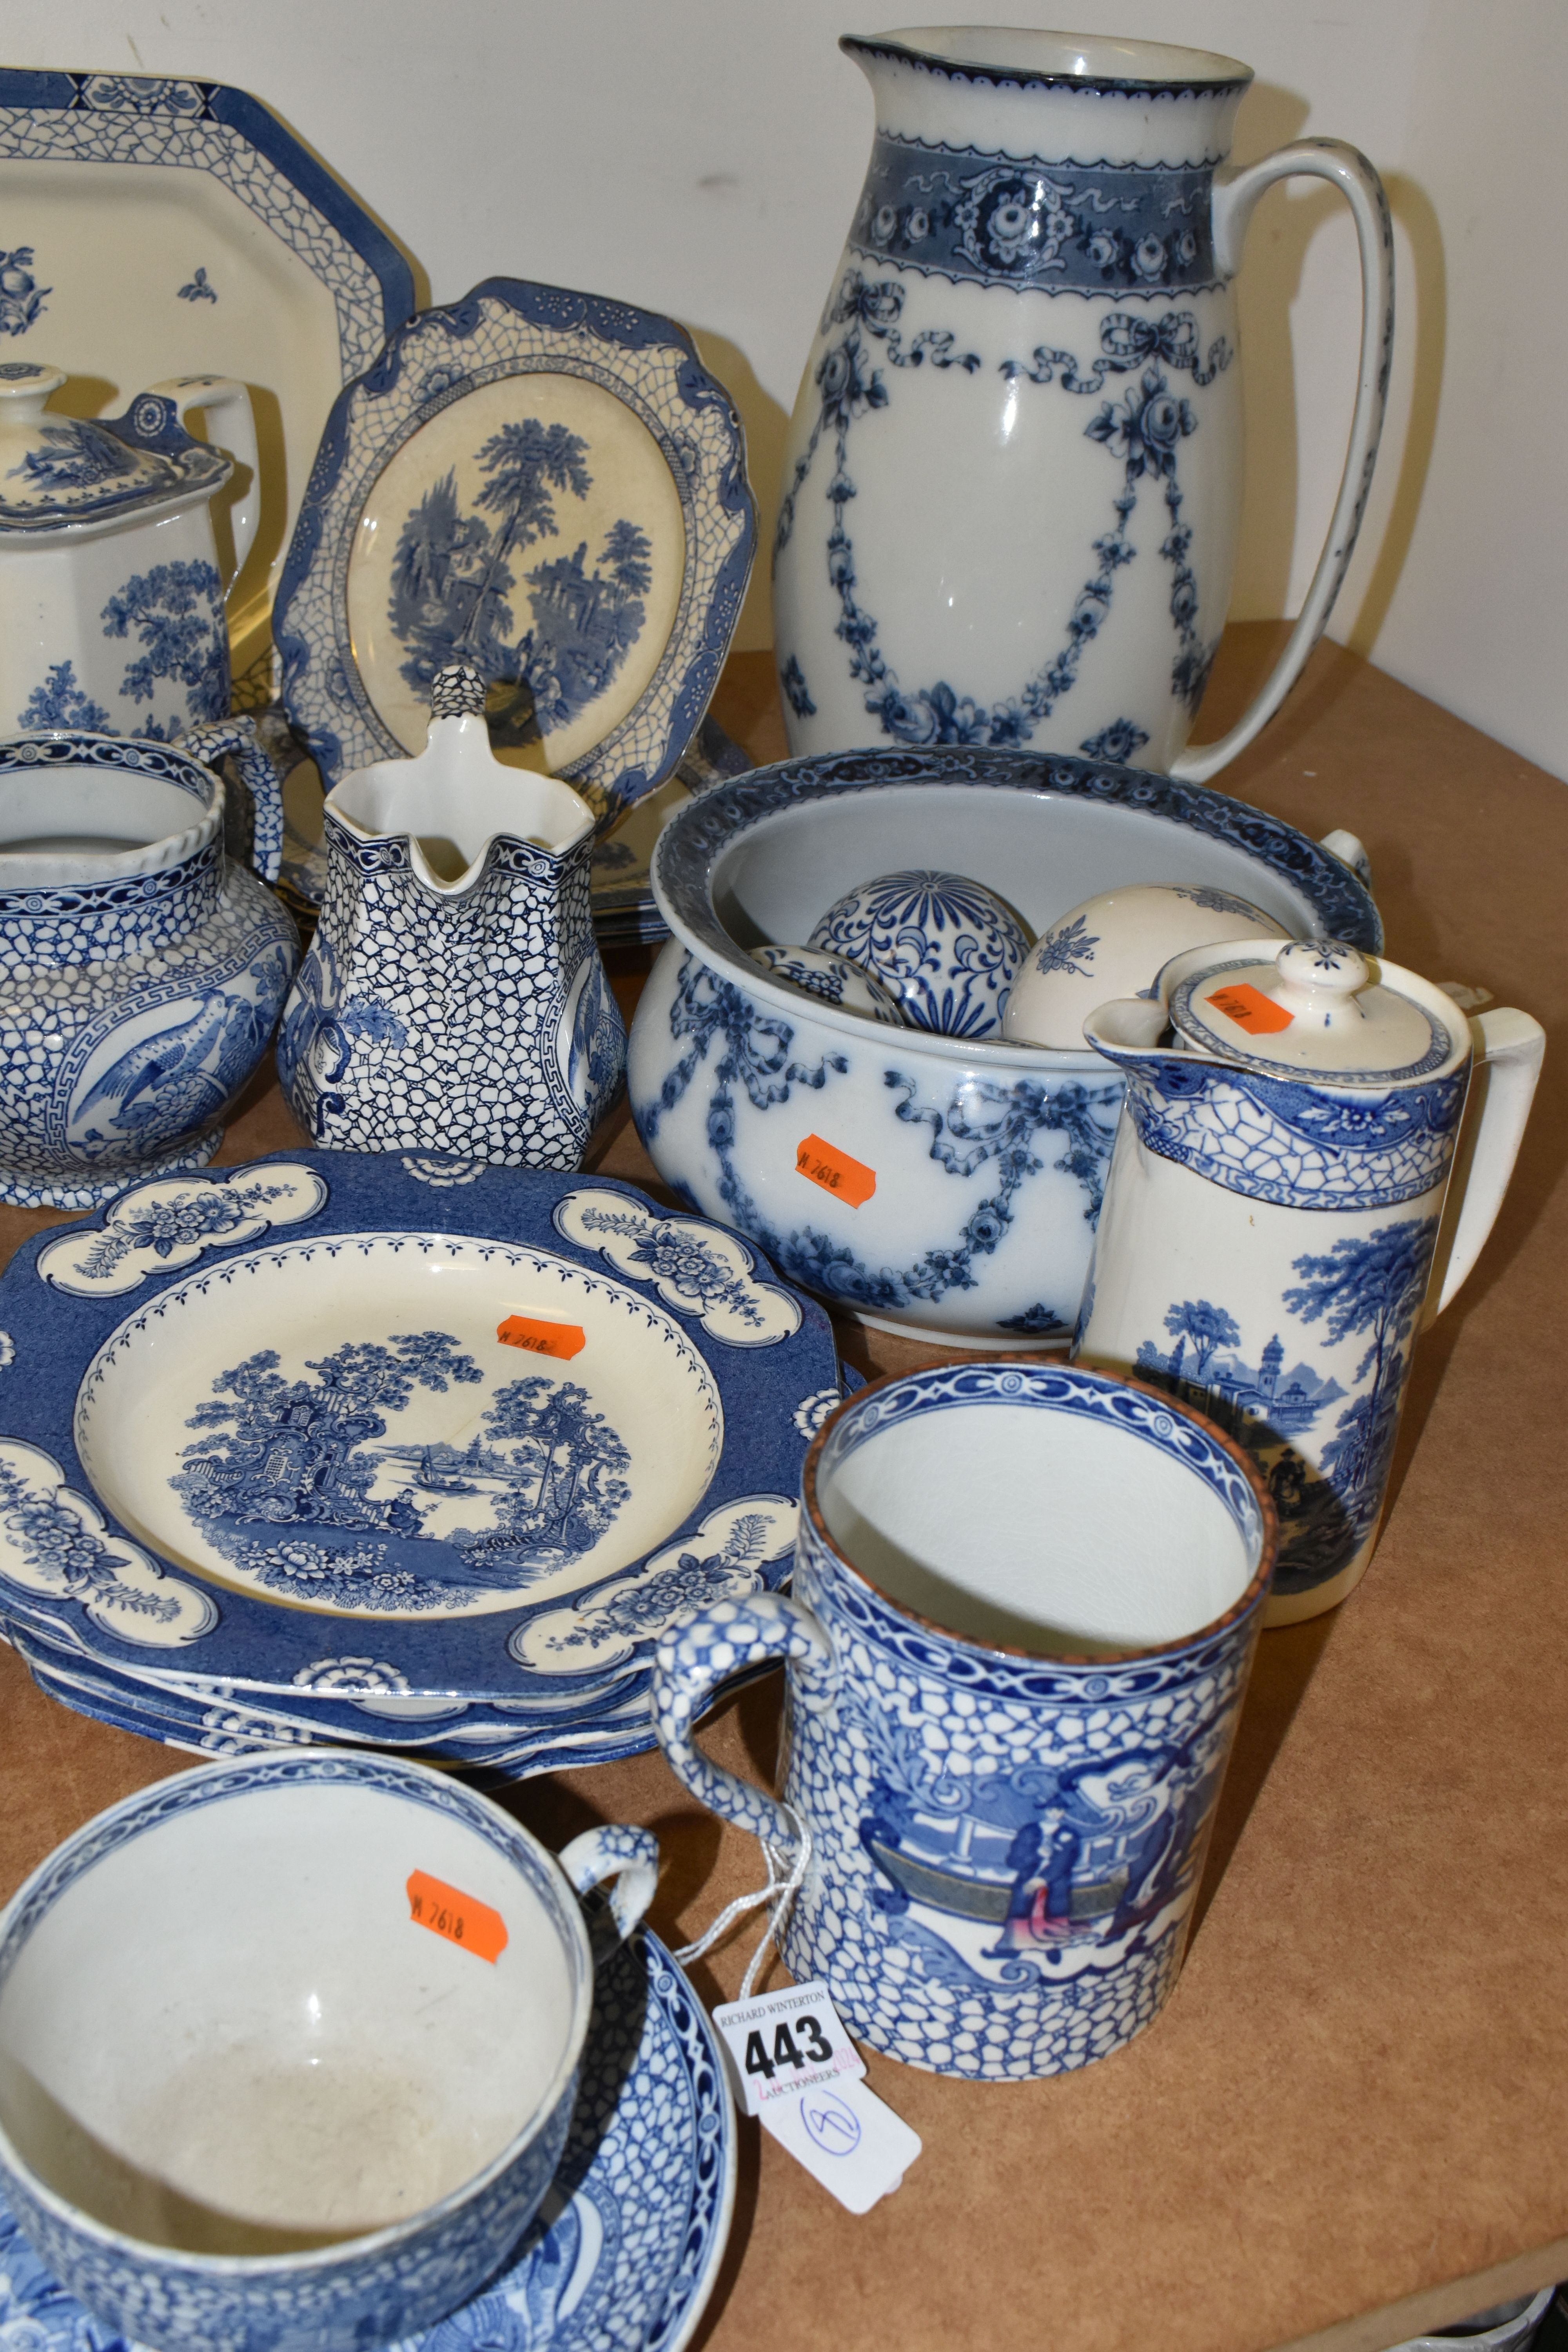 A LARGE QUANTITY OF 'ADAMS' IRONSTONE IN TRADITIONAL BLUE AND WHITE ORIENTAL DESIGNS AND A DINNER - Image 2 of 8